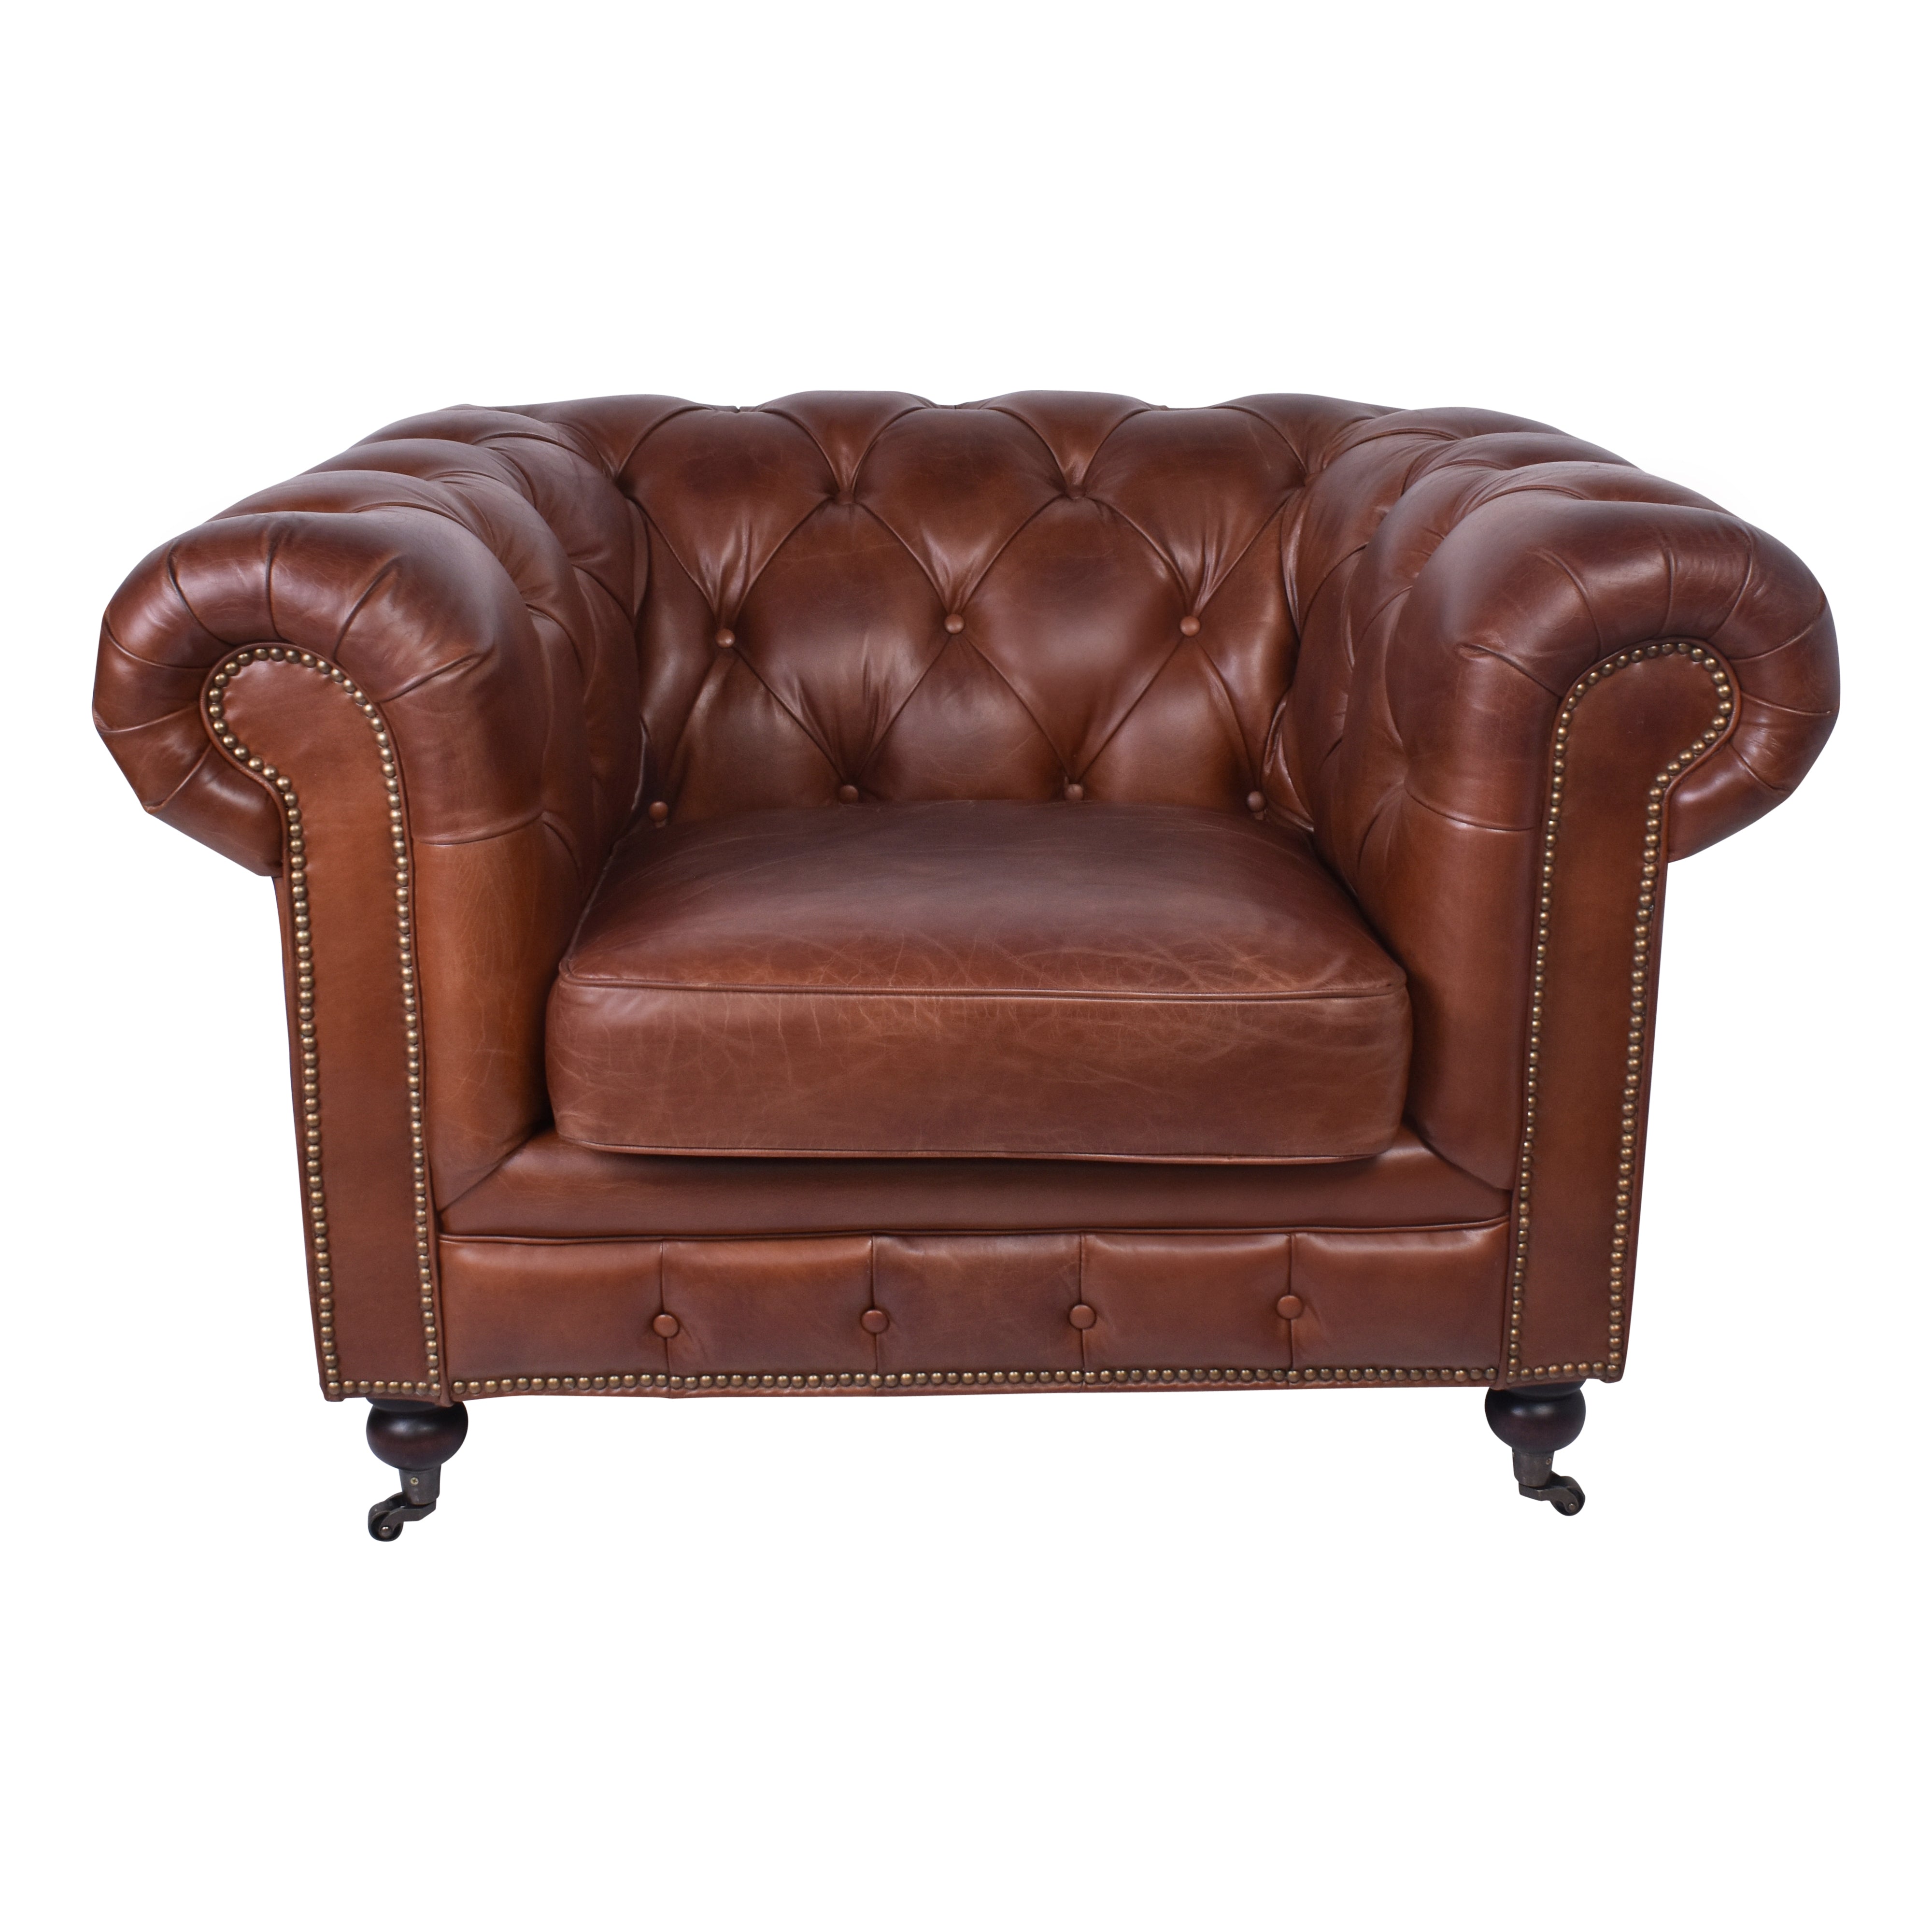 Old Bailey Vintage Leather Chesterfield Armchair - Dovetailed & Double